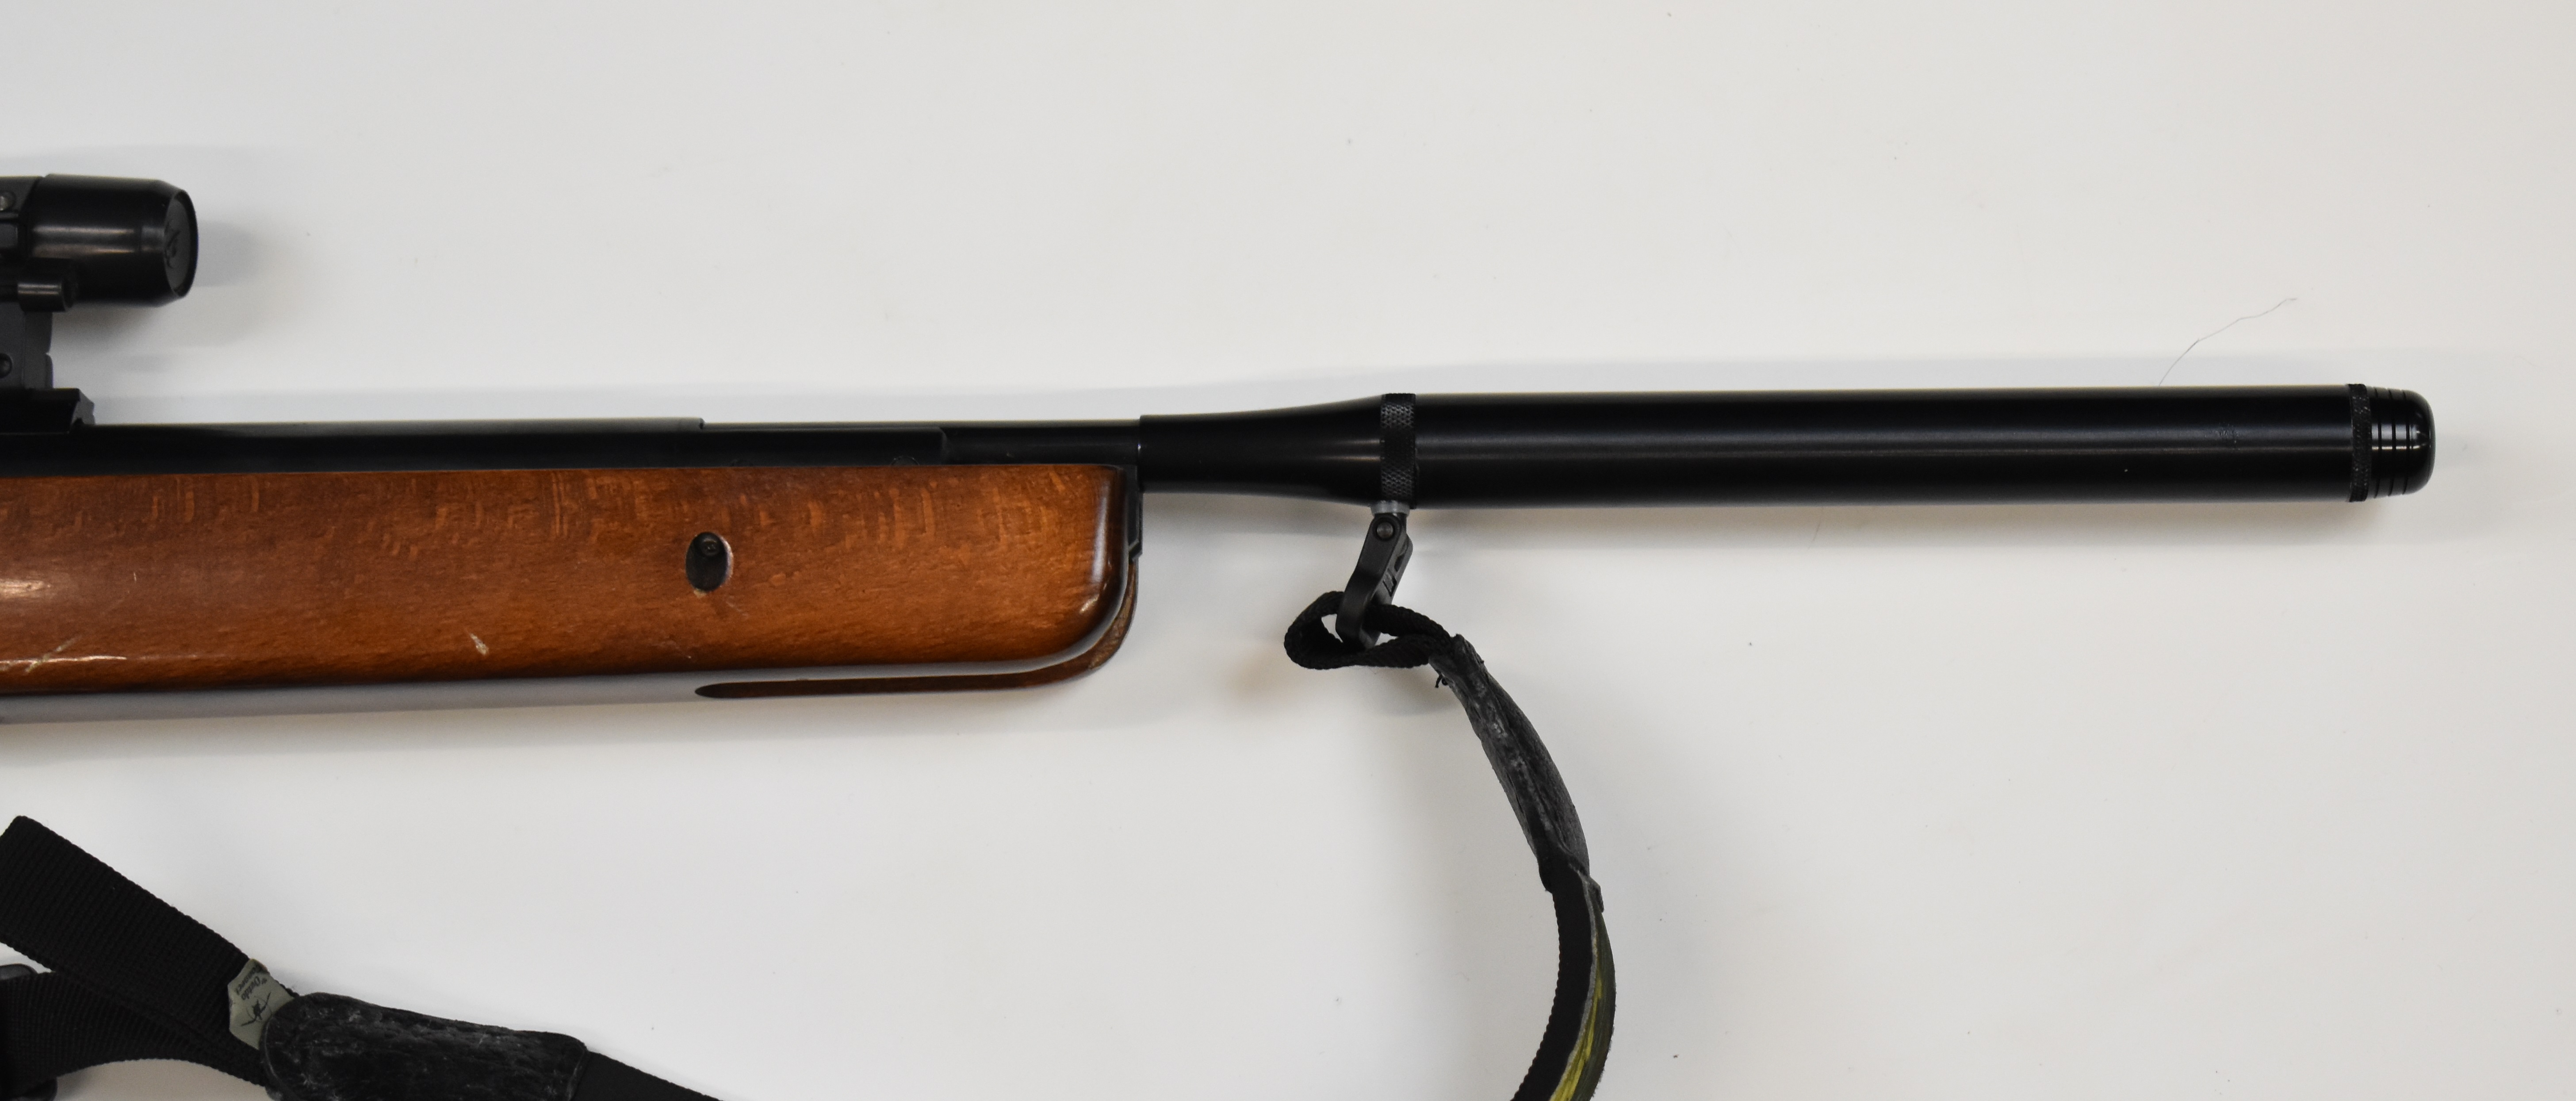 BSA Spitfire .22 air rifle with semi-pistol grip, raised cheek piece, sling, sound moderator and - Image 5 of 9